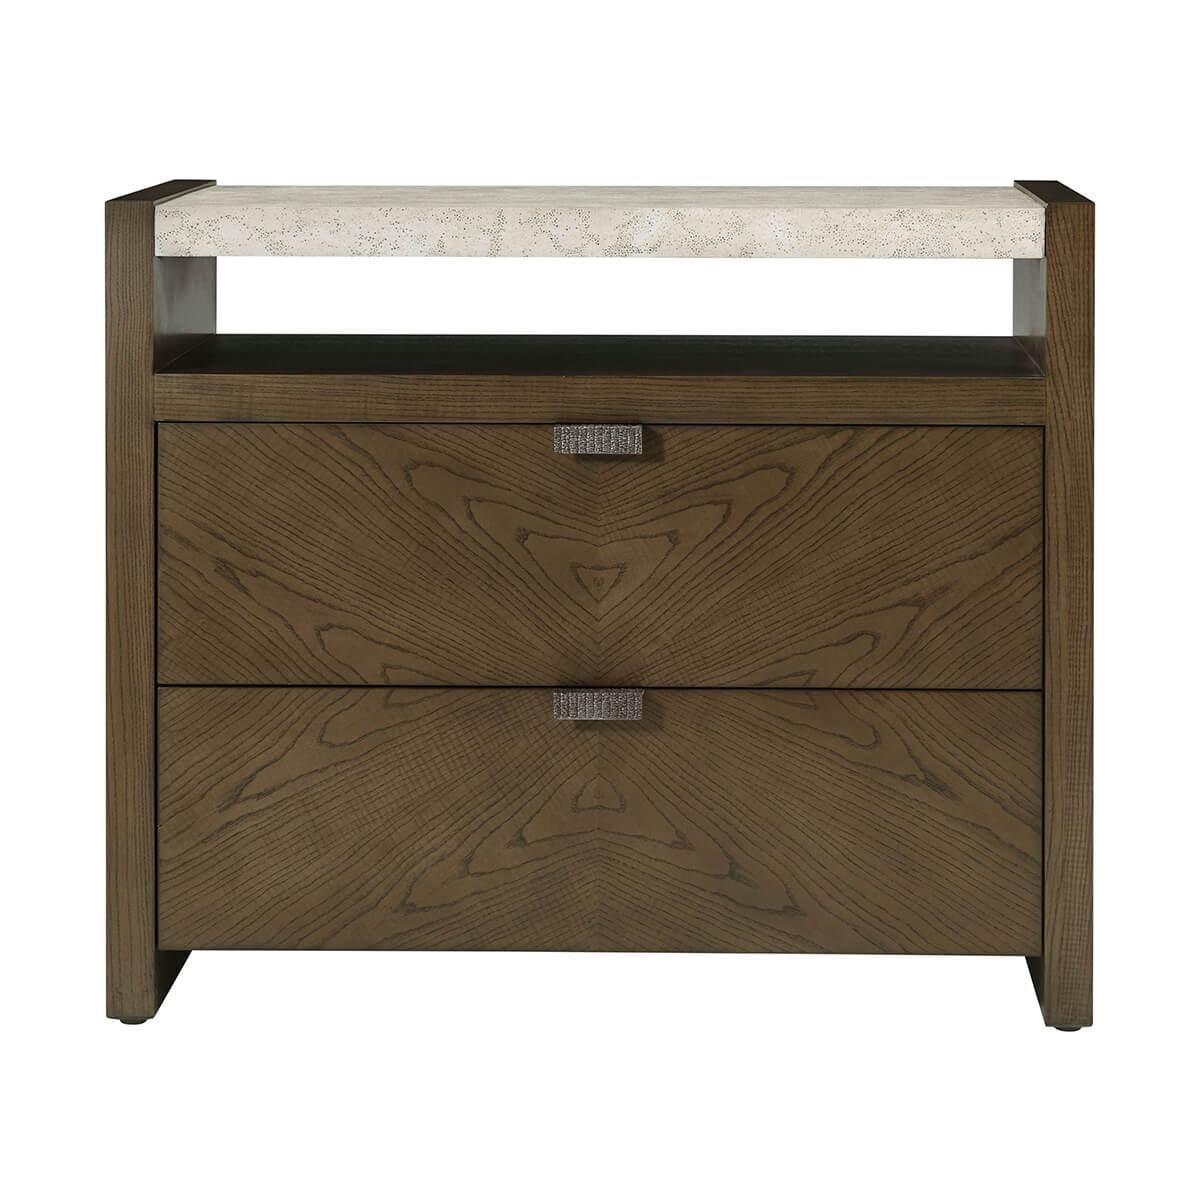 a handsome bedside nightstand in figured cathedral ash in a dark Earth finish with metal pulls in our Ember finish and soft close drawers.

The top of this nightstand is done in our exclusive Mineral finish. It is perfect for storing your bedroom